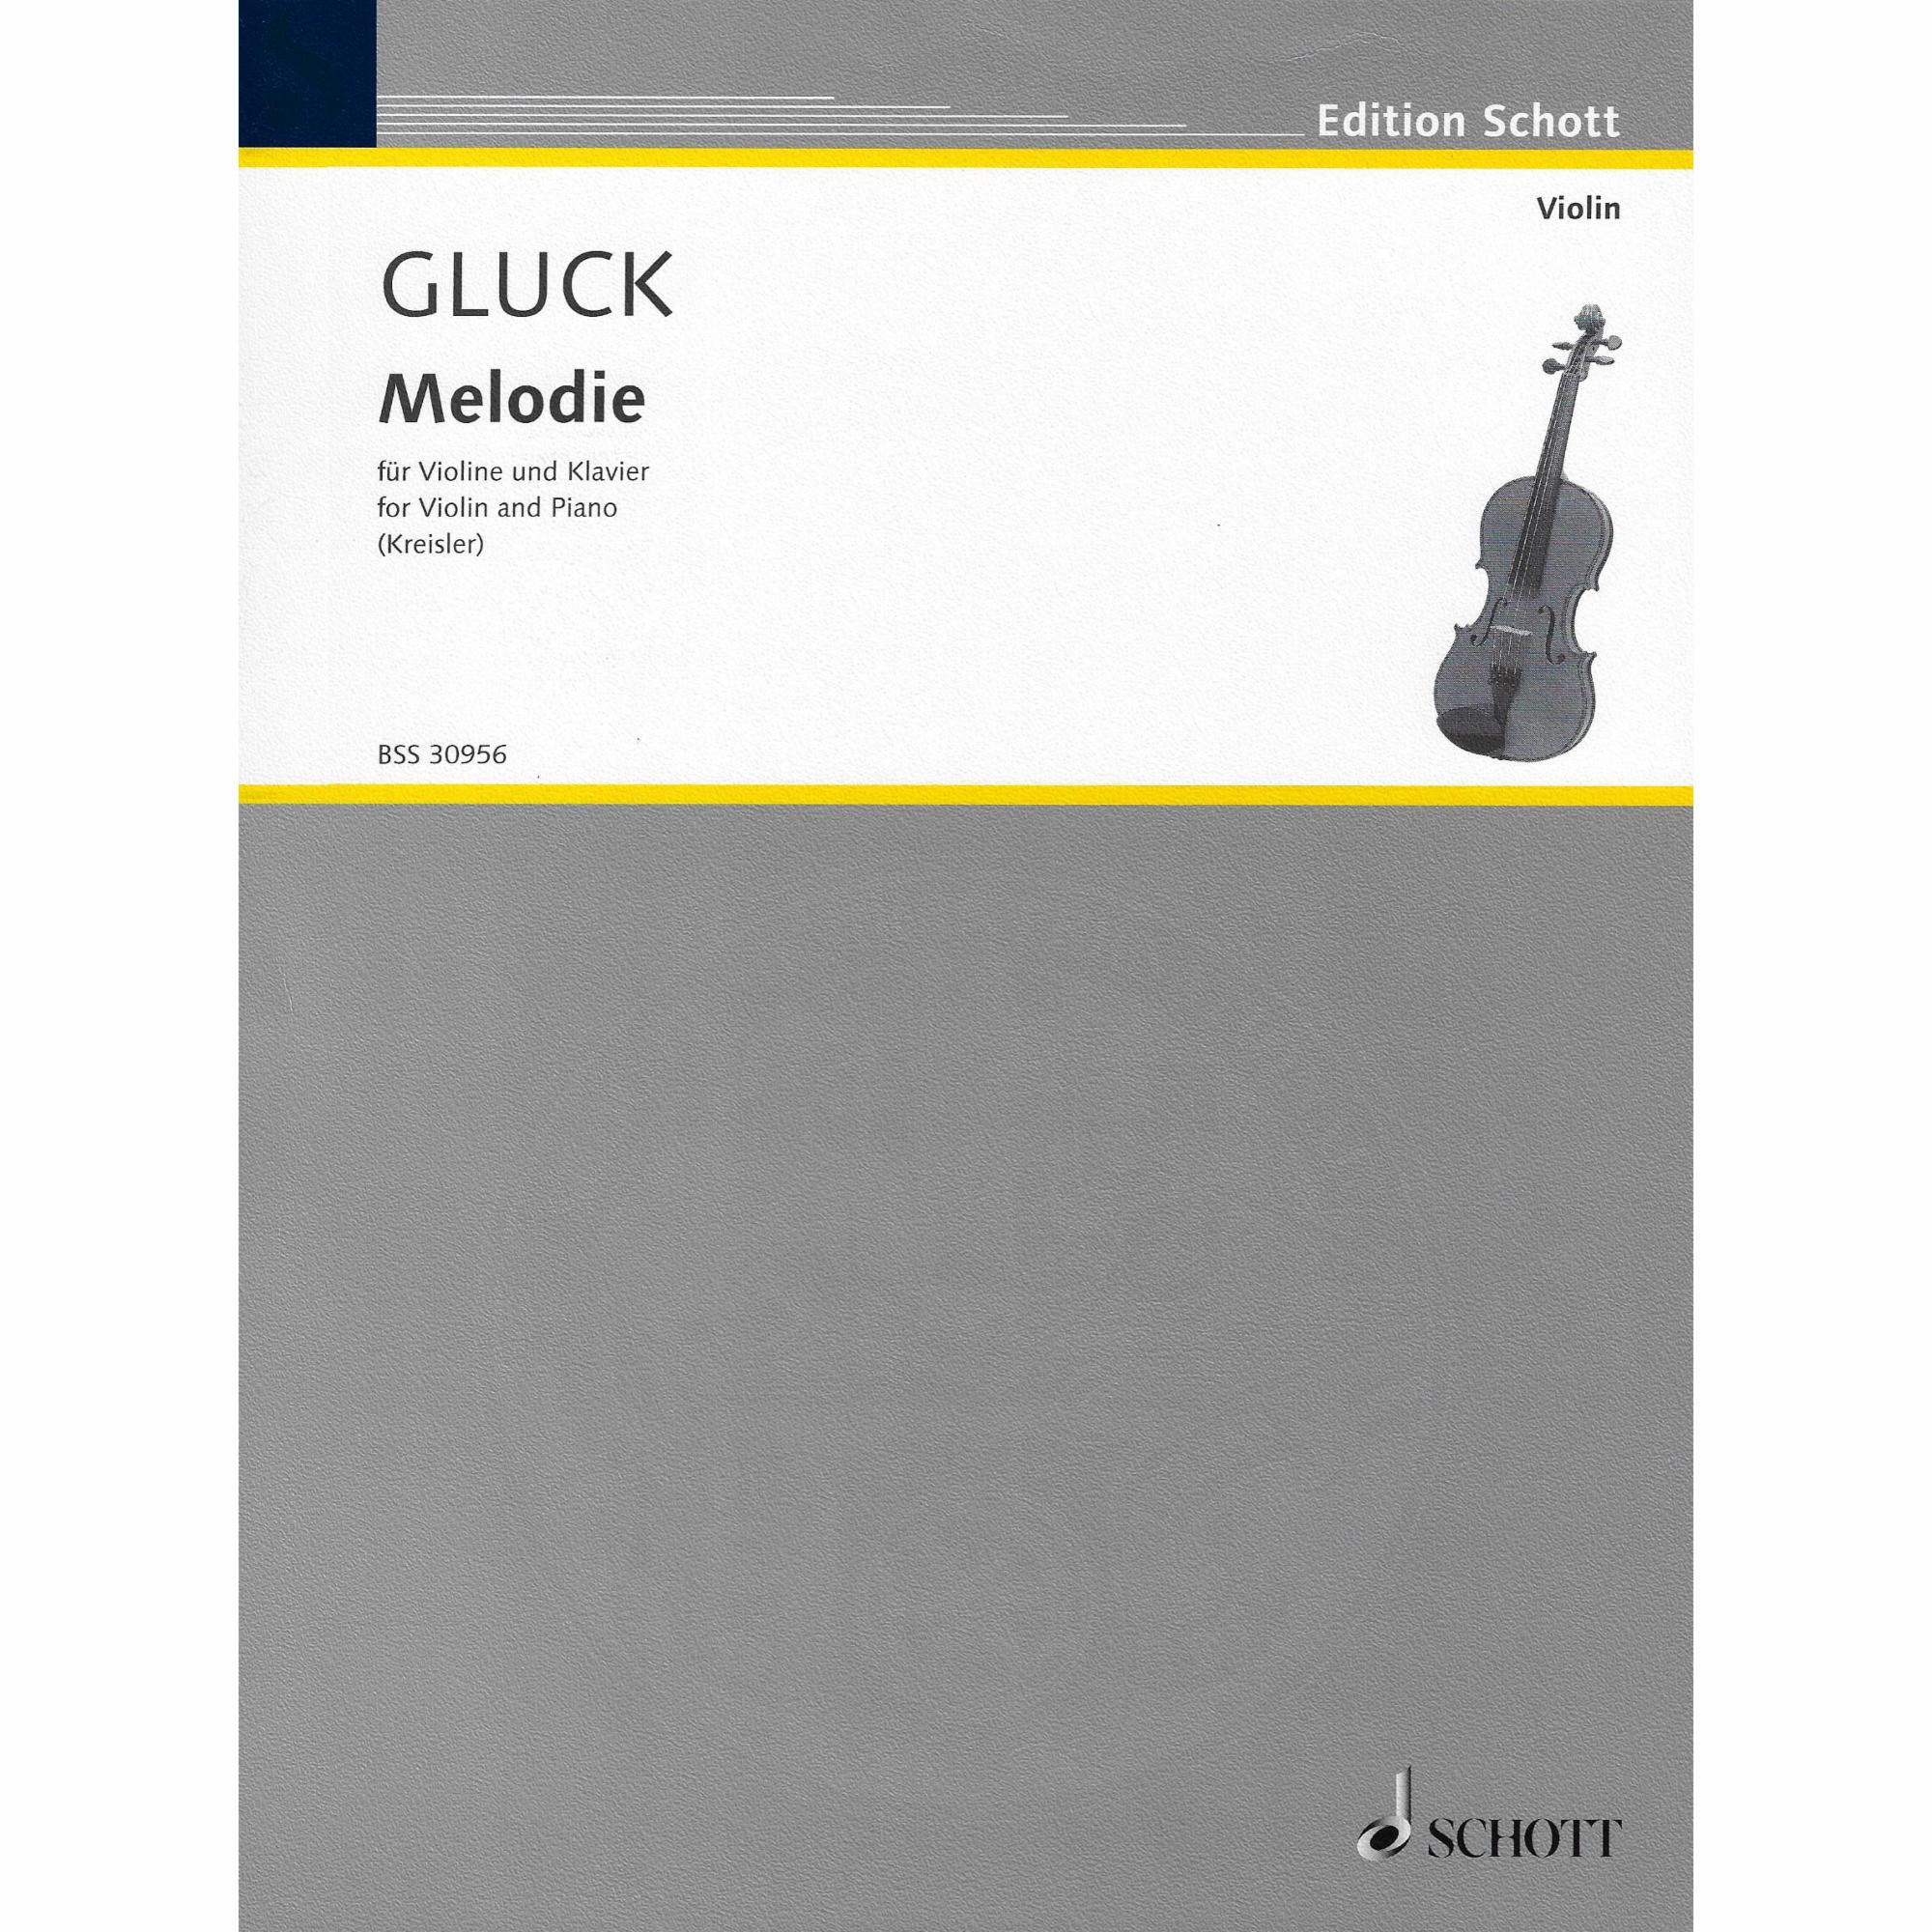 Gluck -- Melodie for Violin and Piano